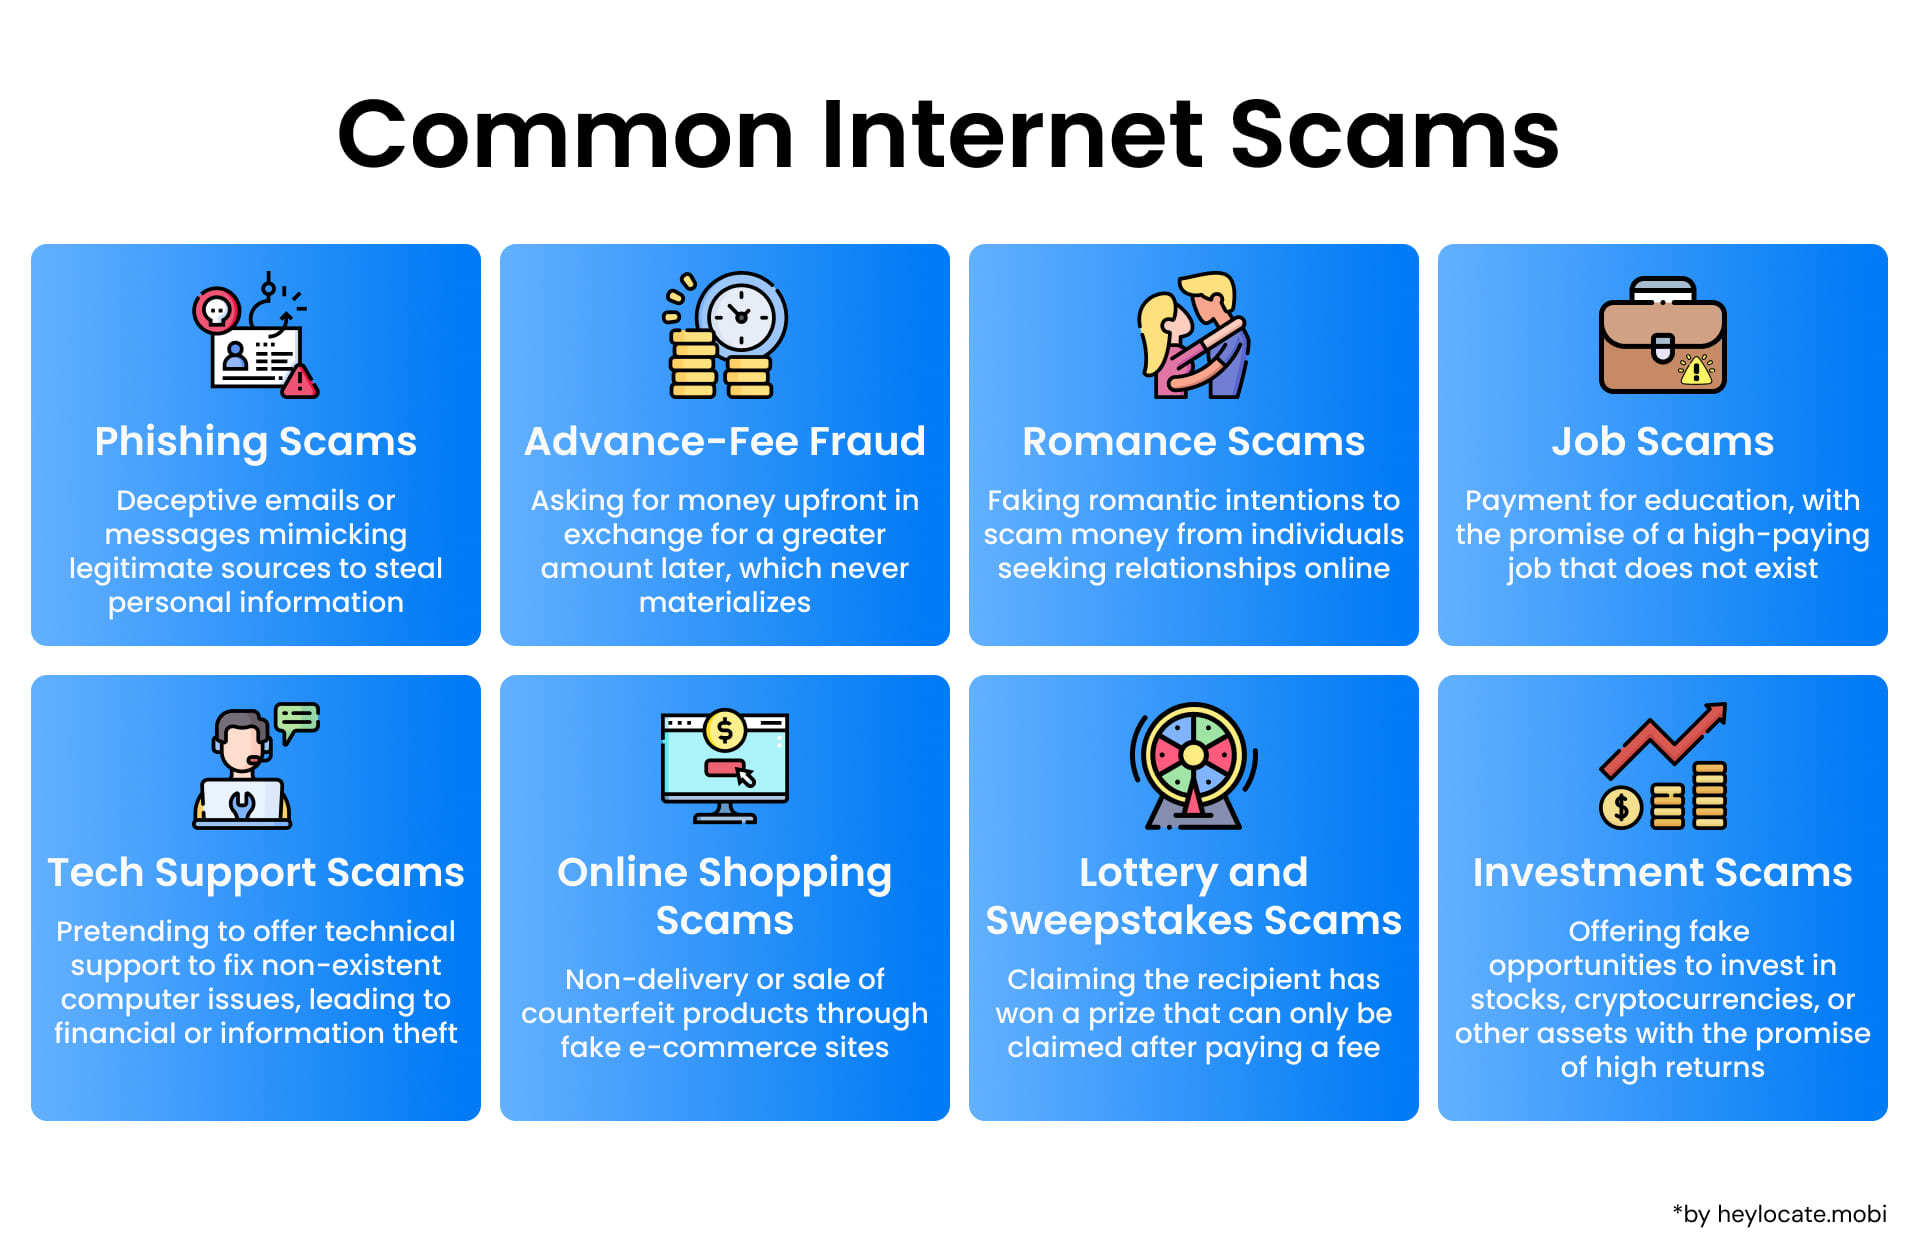 An infographic detailing various types of common internet scams, including phishing and romance scams